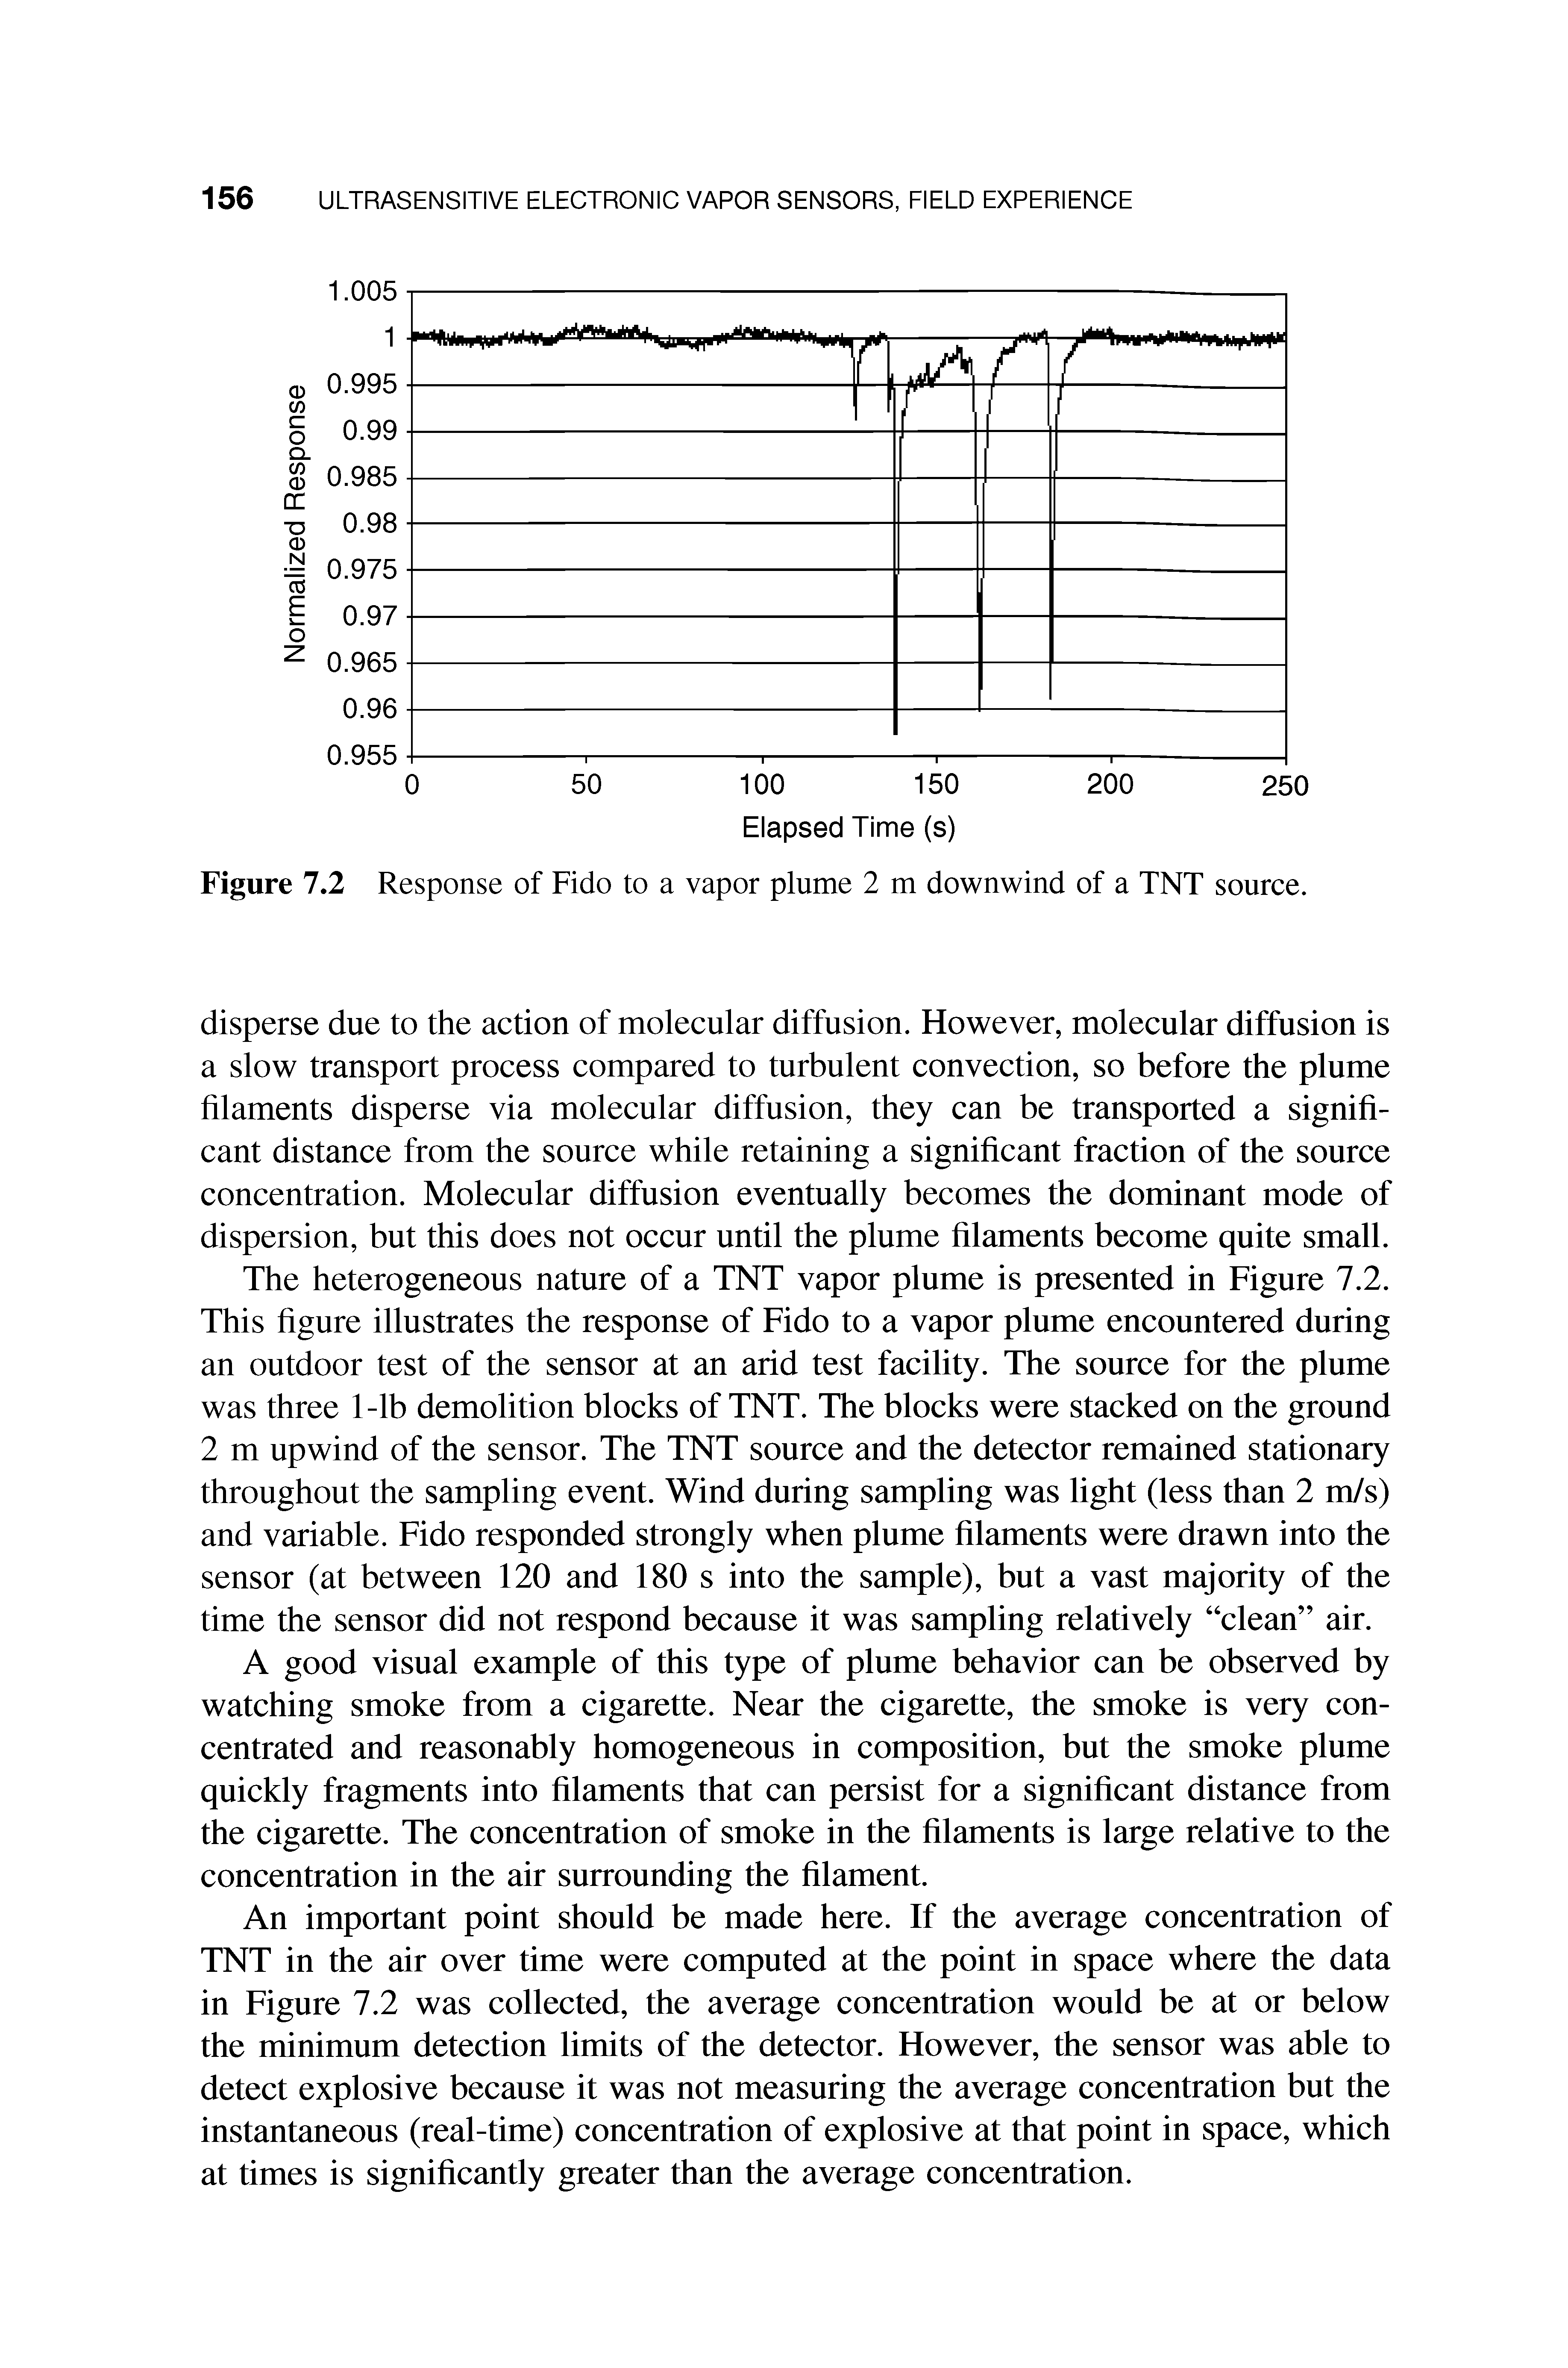 Figure 7.2 Response of Fido to a vapor plume 2 m downwind of a TNT source.